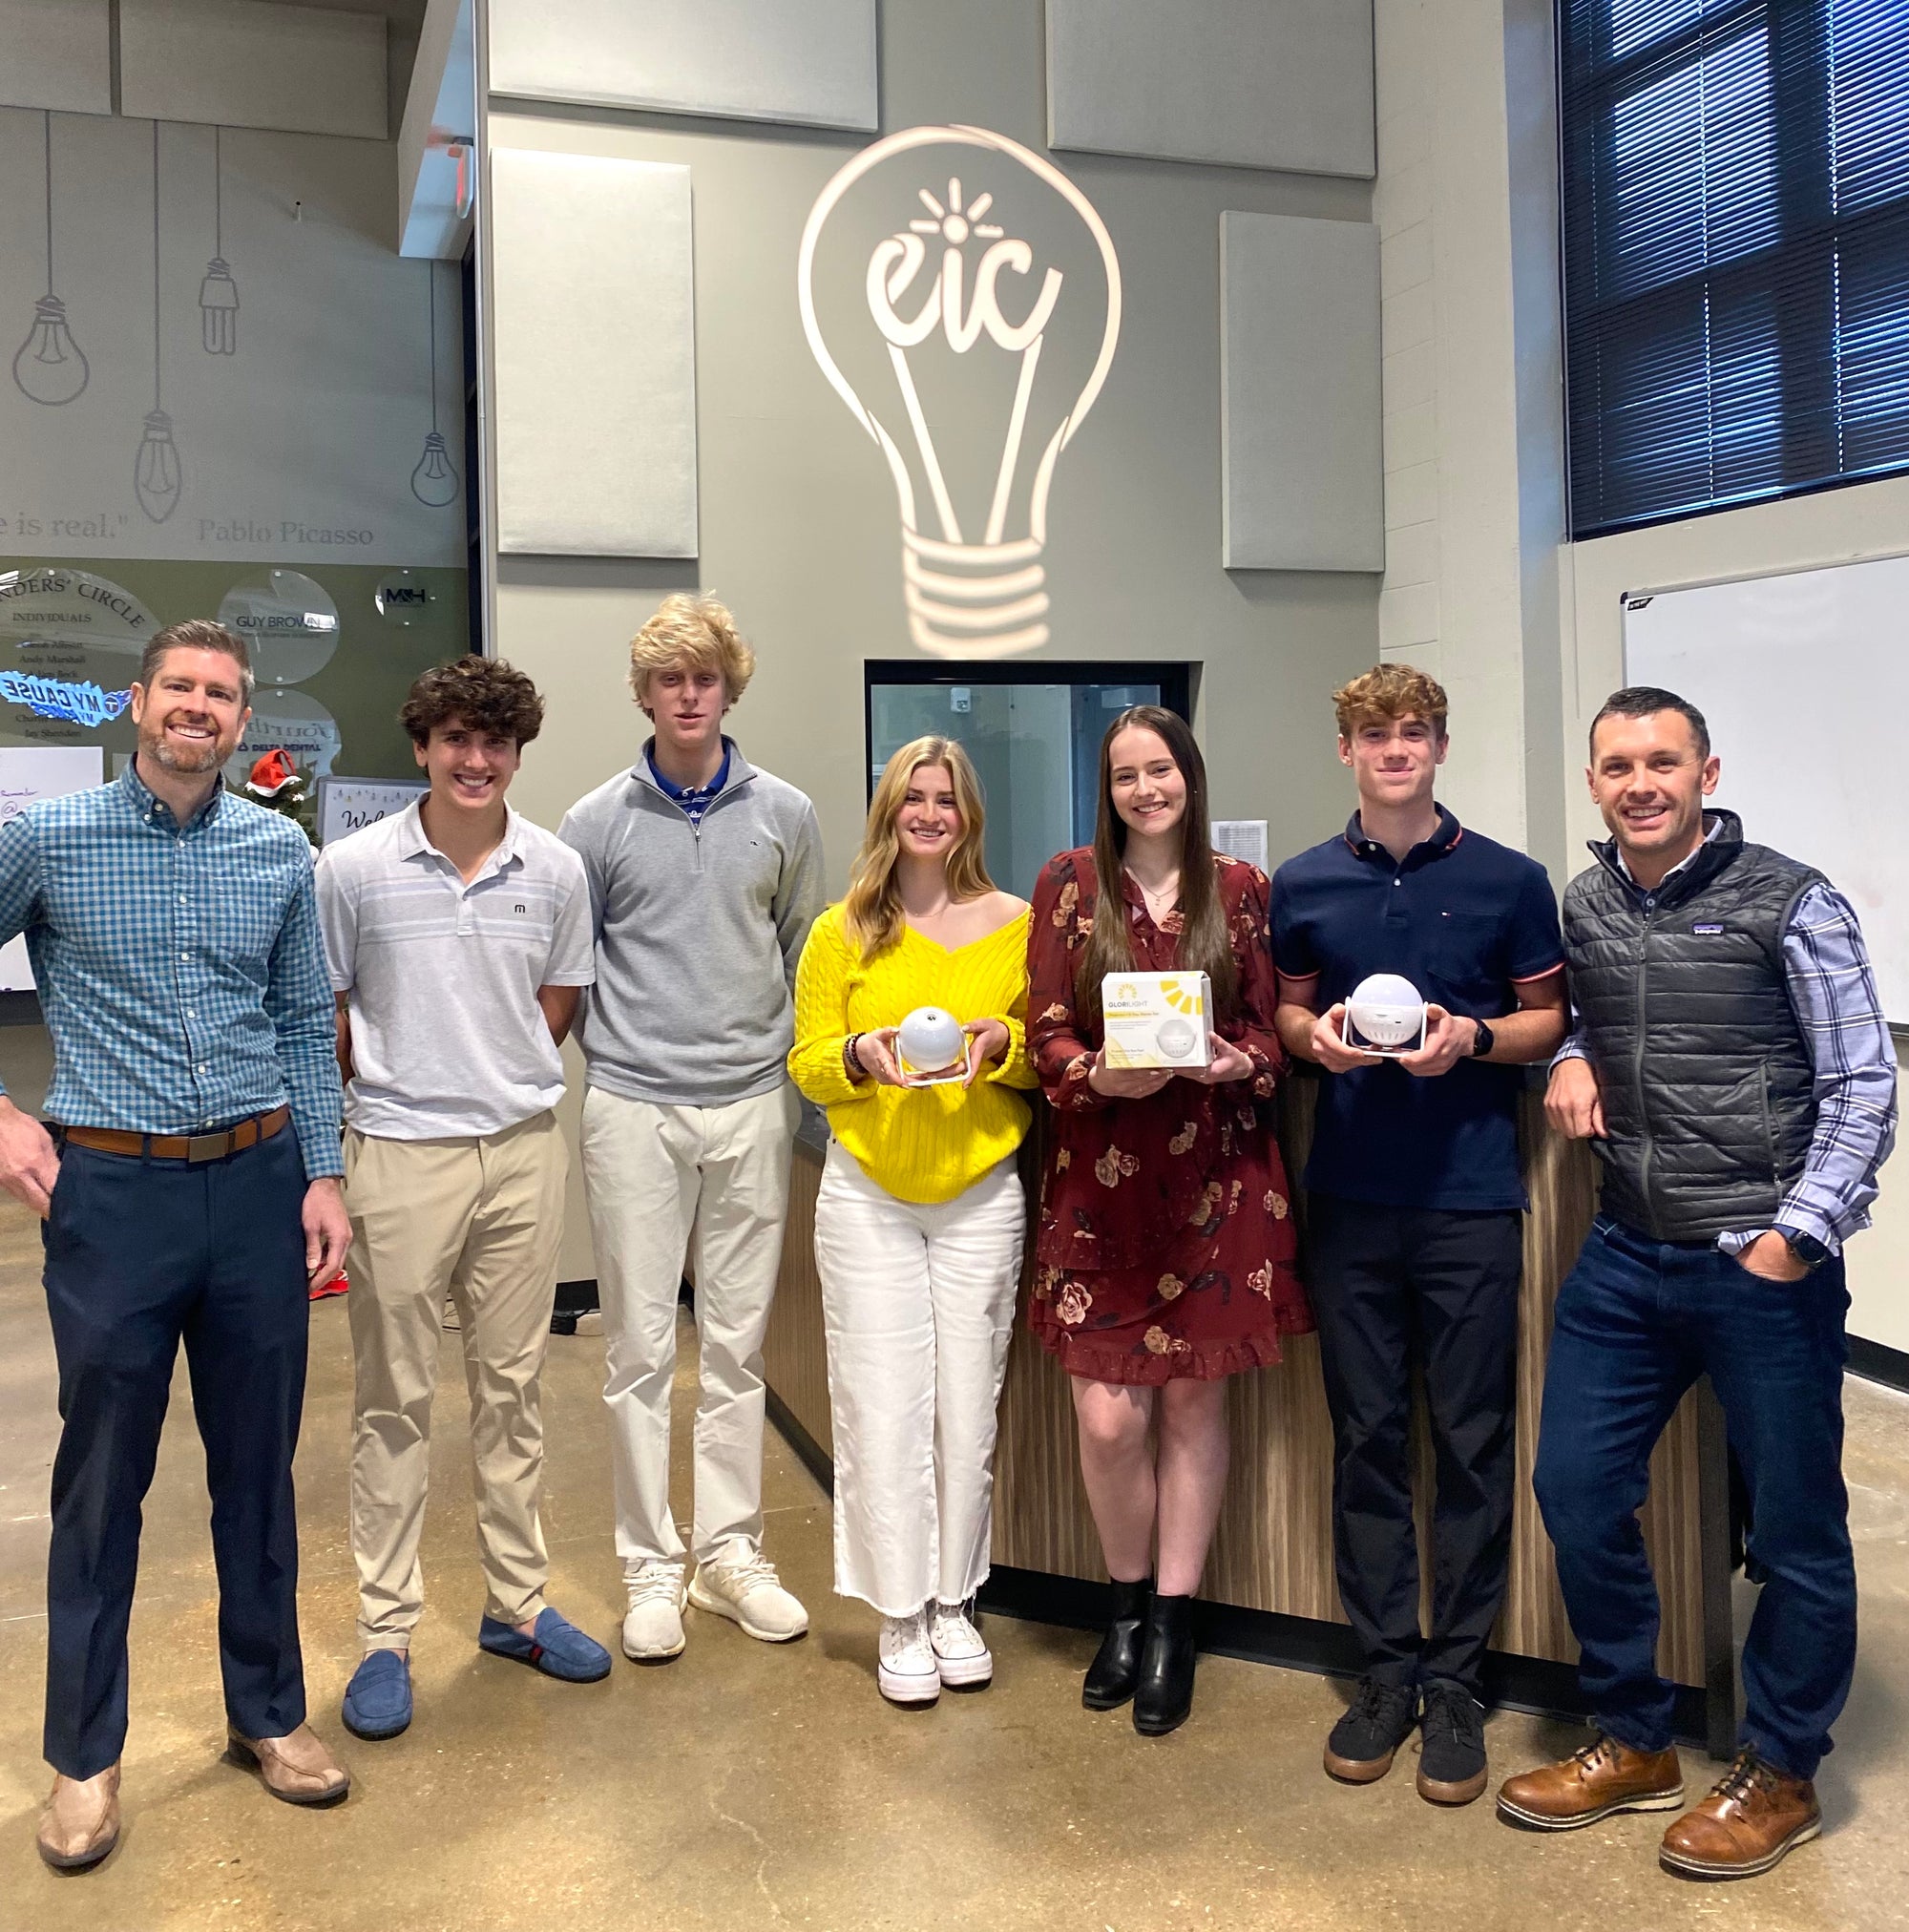 picture of 5 high school students that helped start GlorilLight and co founders Matt Stamper on far left and Clay Banks on far right.  Picture is taken at the EIC with EIC logo in background.  Eic logo is a lightbulb. 